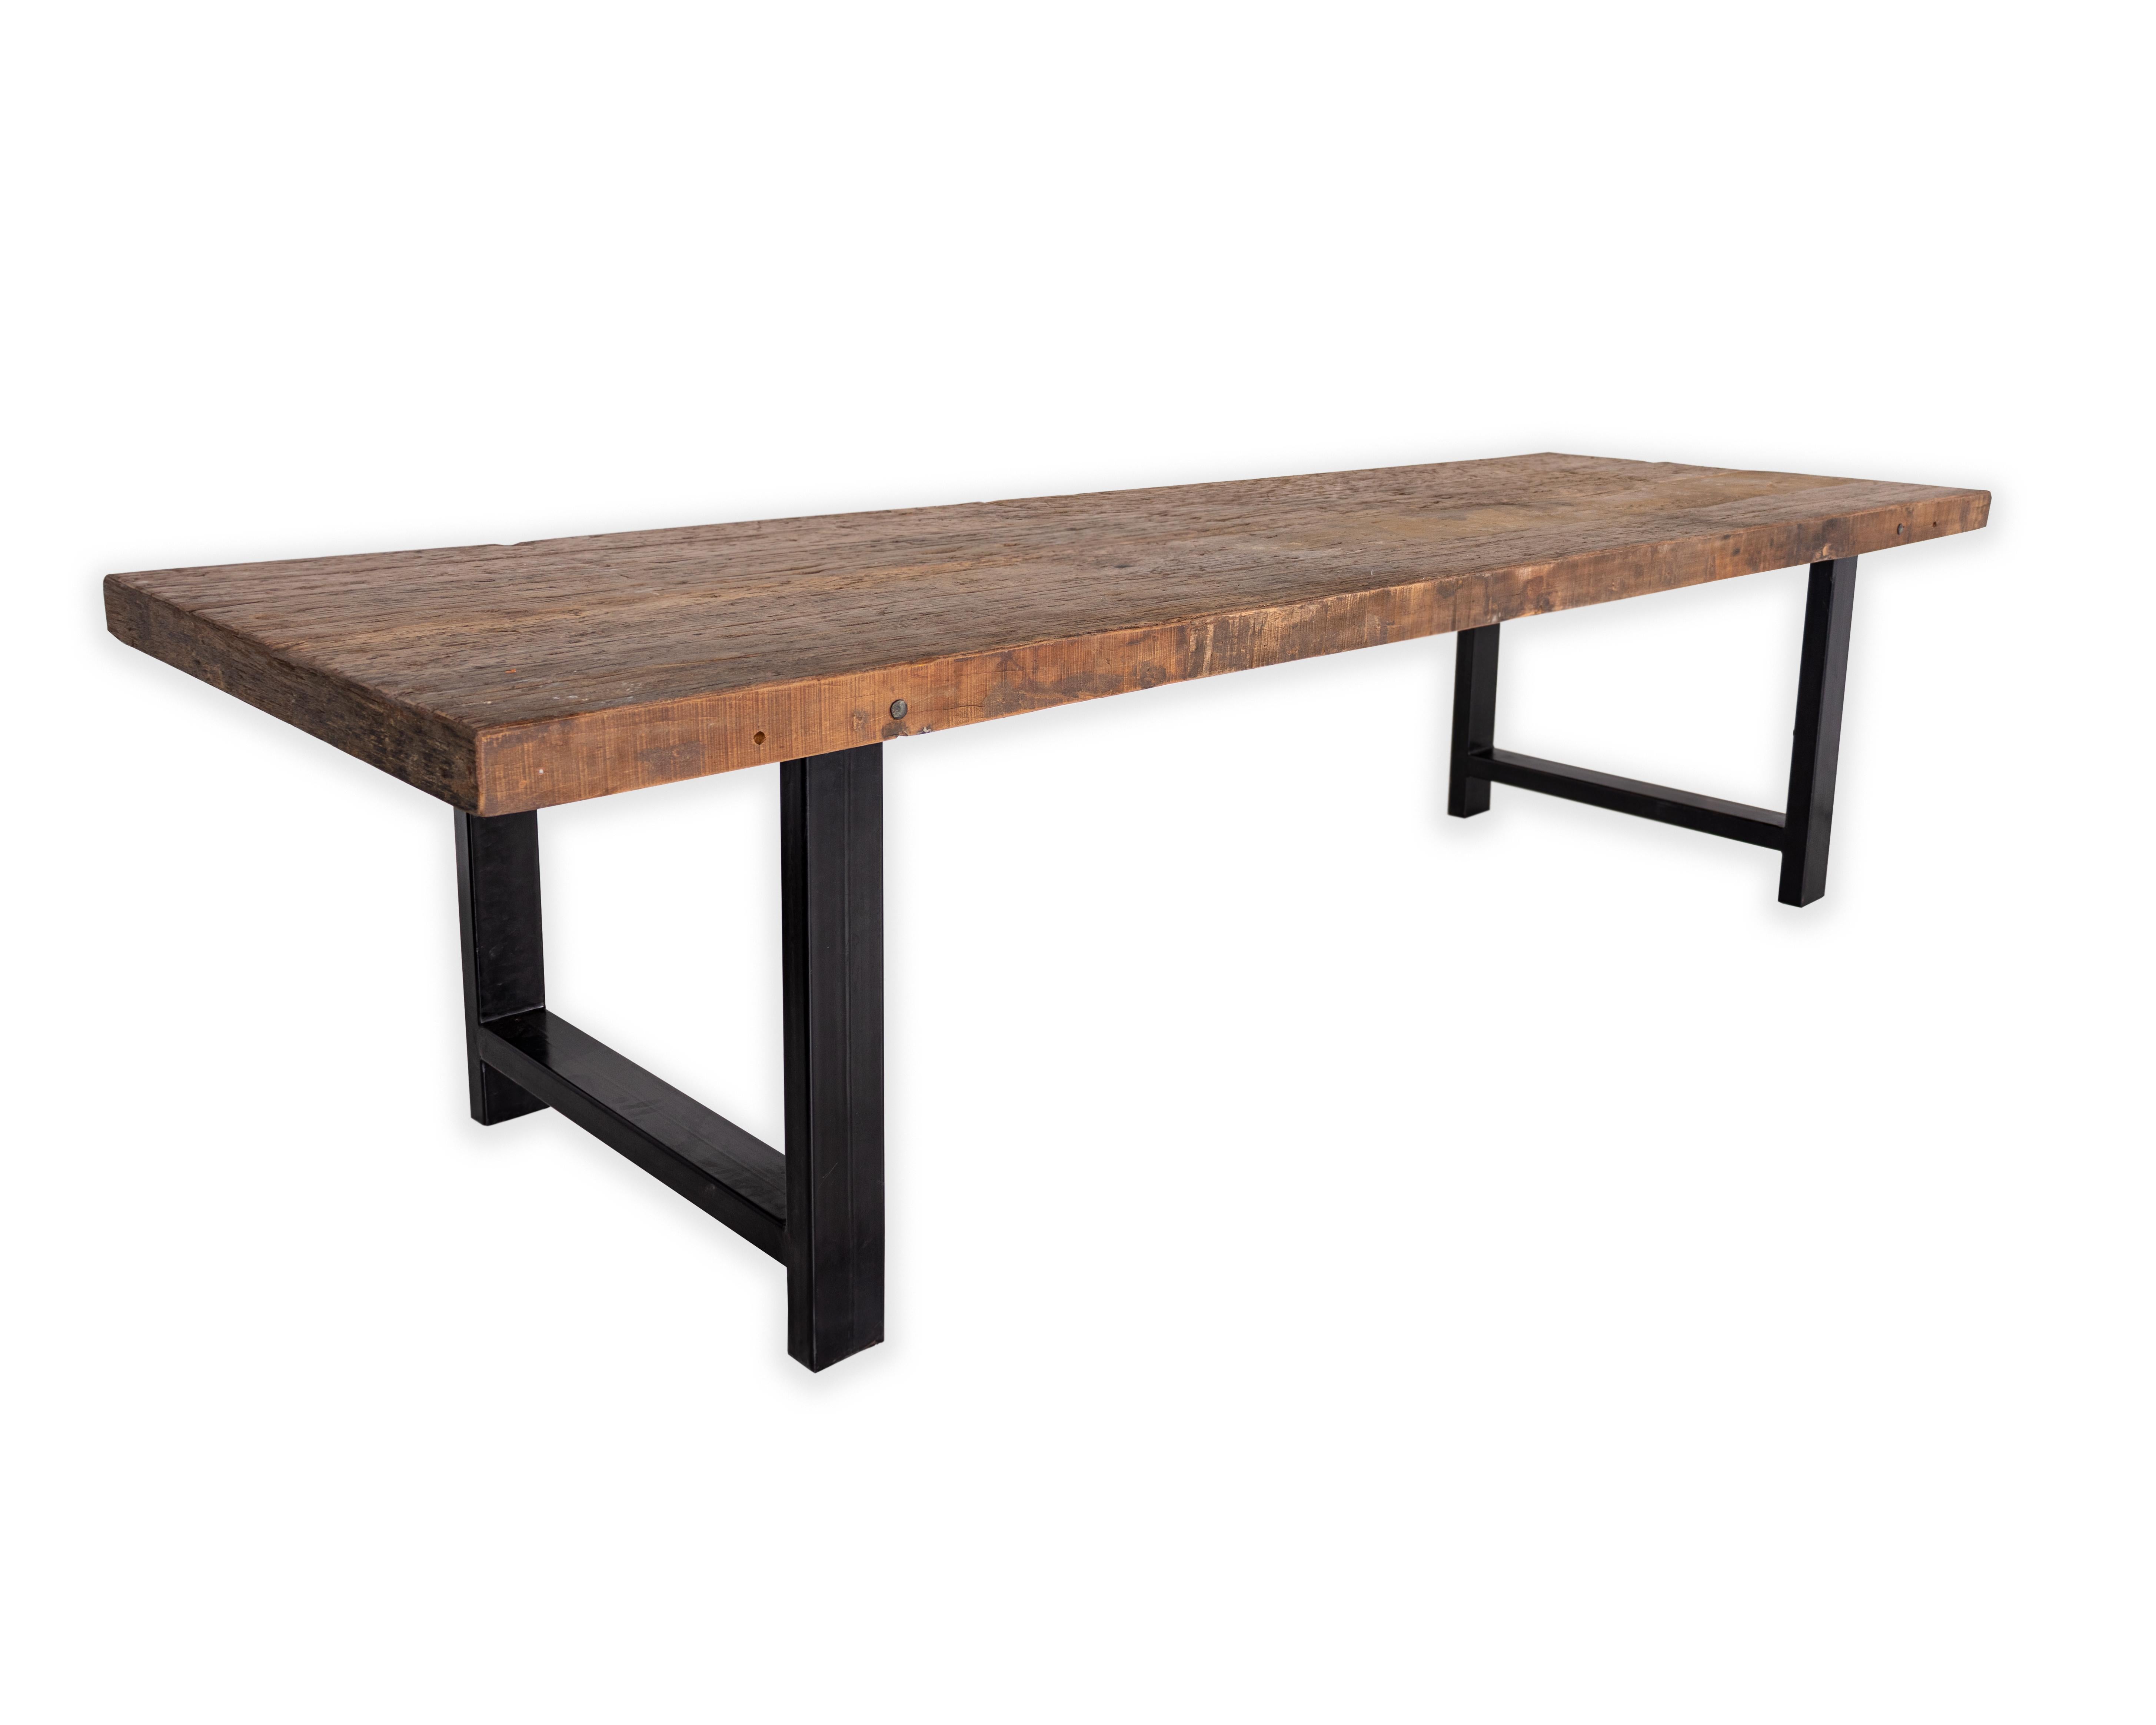 Modernist dining table made from reclaimed elm on an ebonized steel base

Piece from the Le Monde collection. Exclusive to Brendan Bass.
  